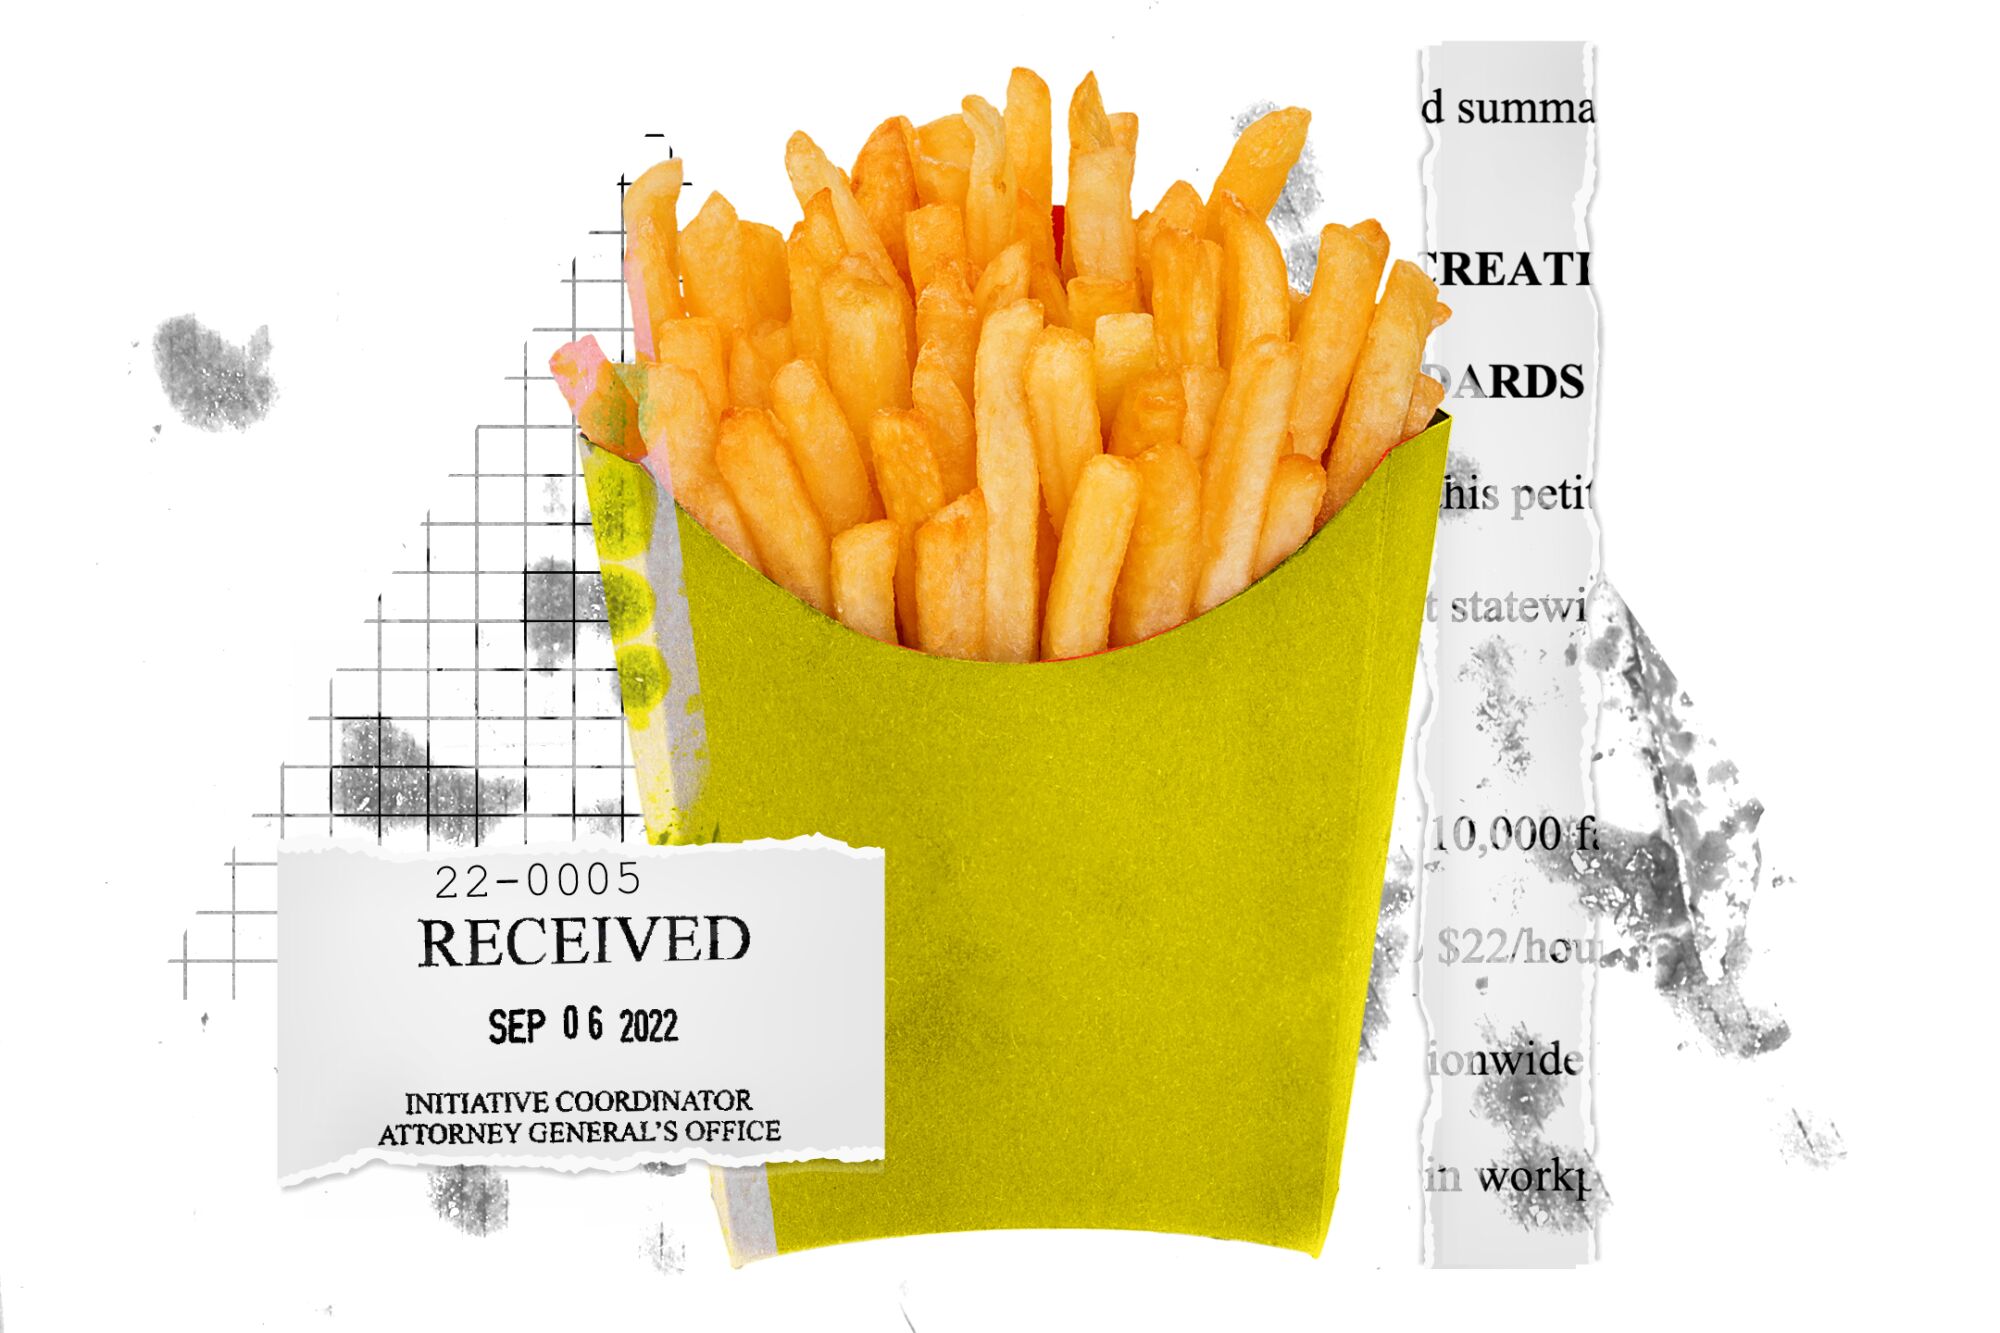 A collage illustration shows French fries and torn pieces of legal documents related to the fast-food workers referendum.